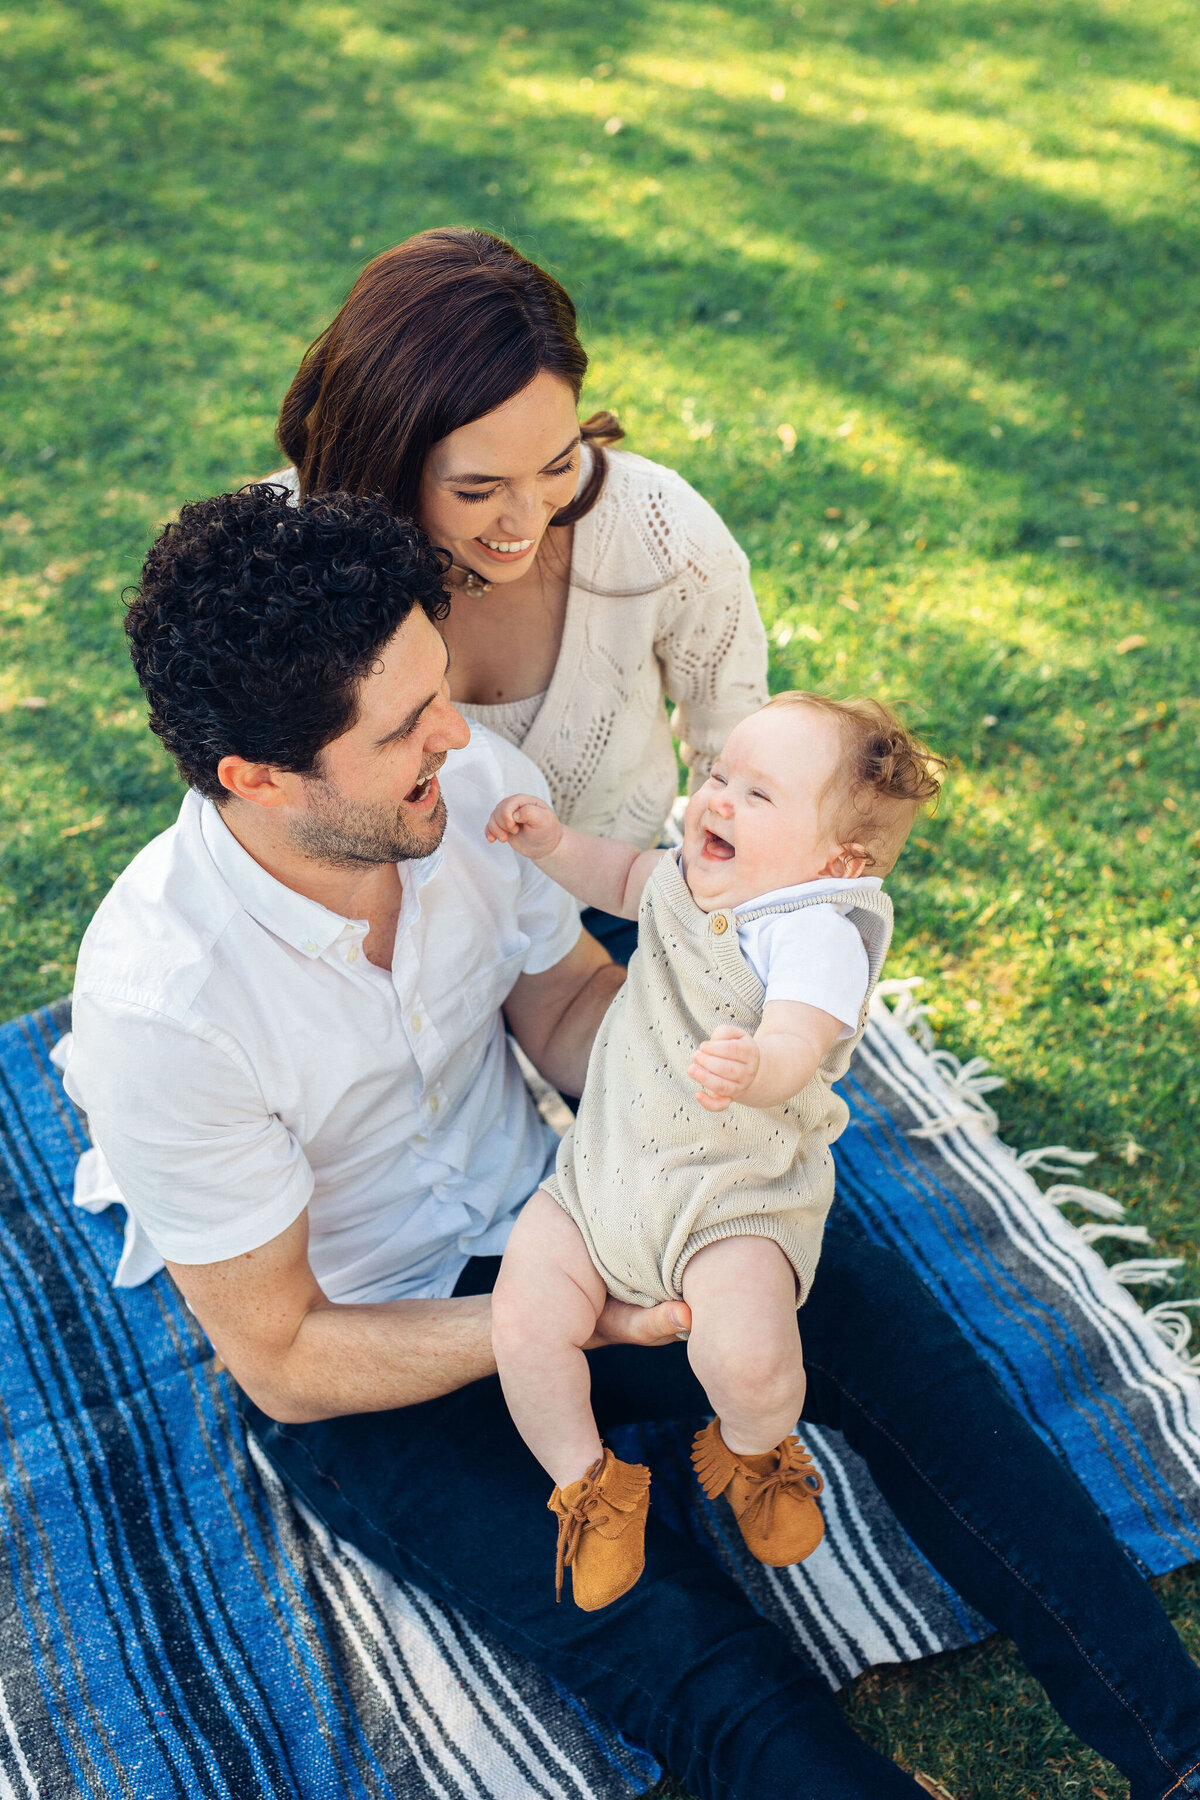 Family Portrait Photo Of Couple Laughing With Their Baby In Los Angeles